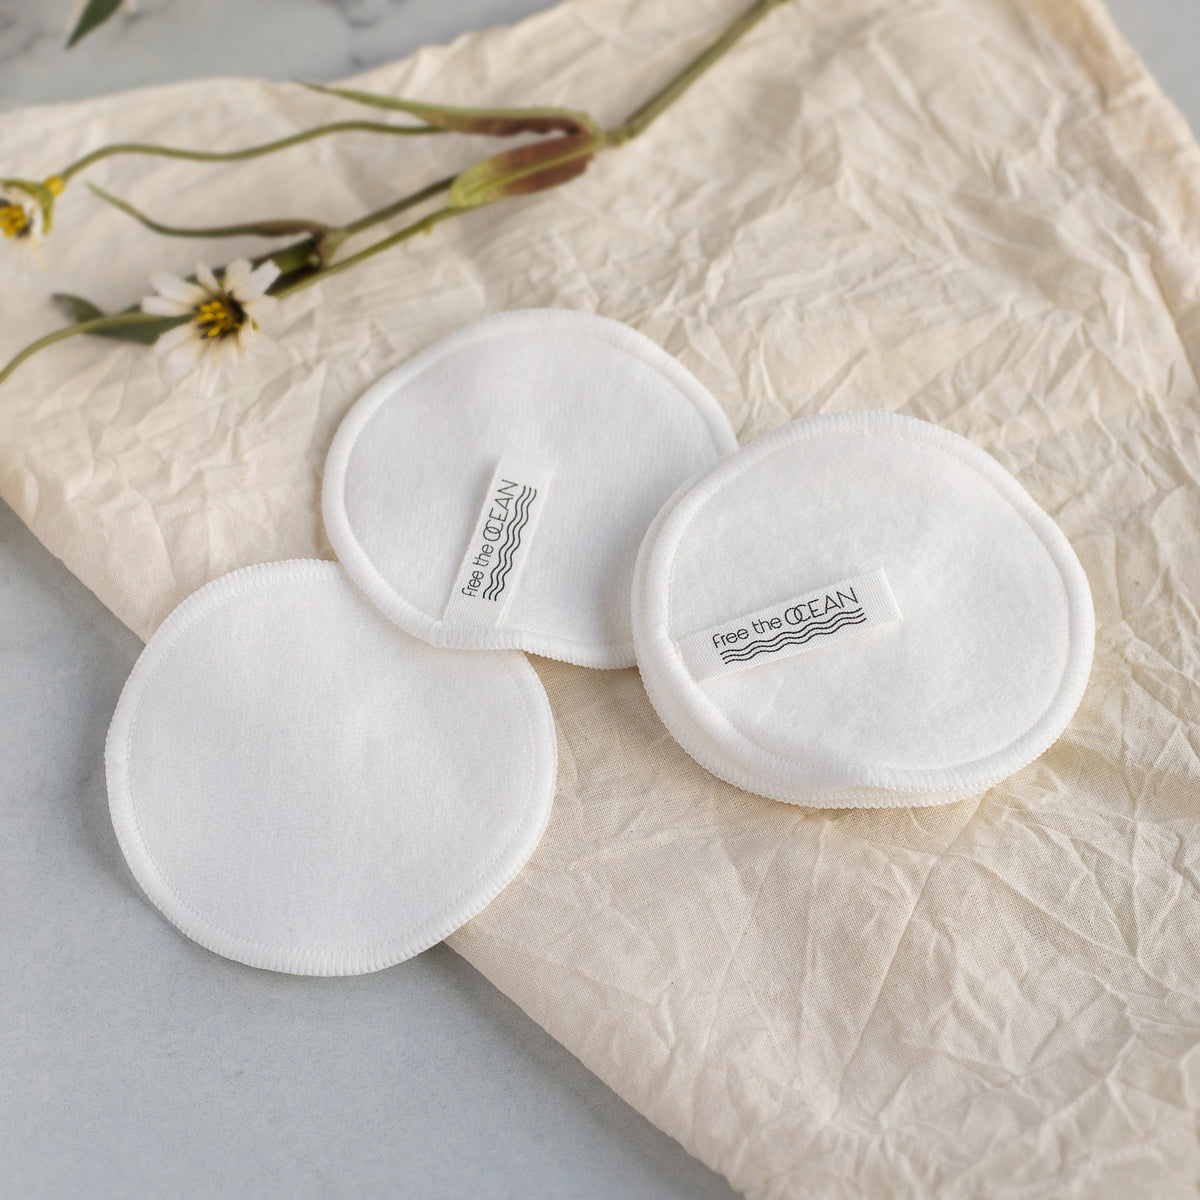 Reusable Makeup Remover Pads Free The